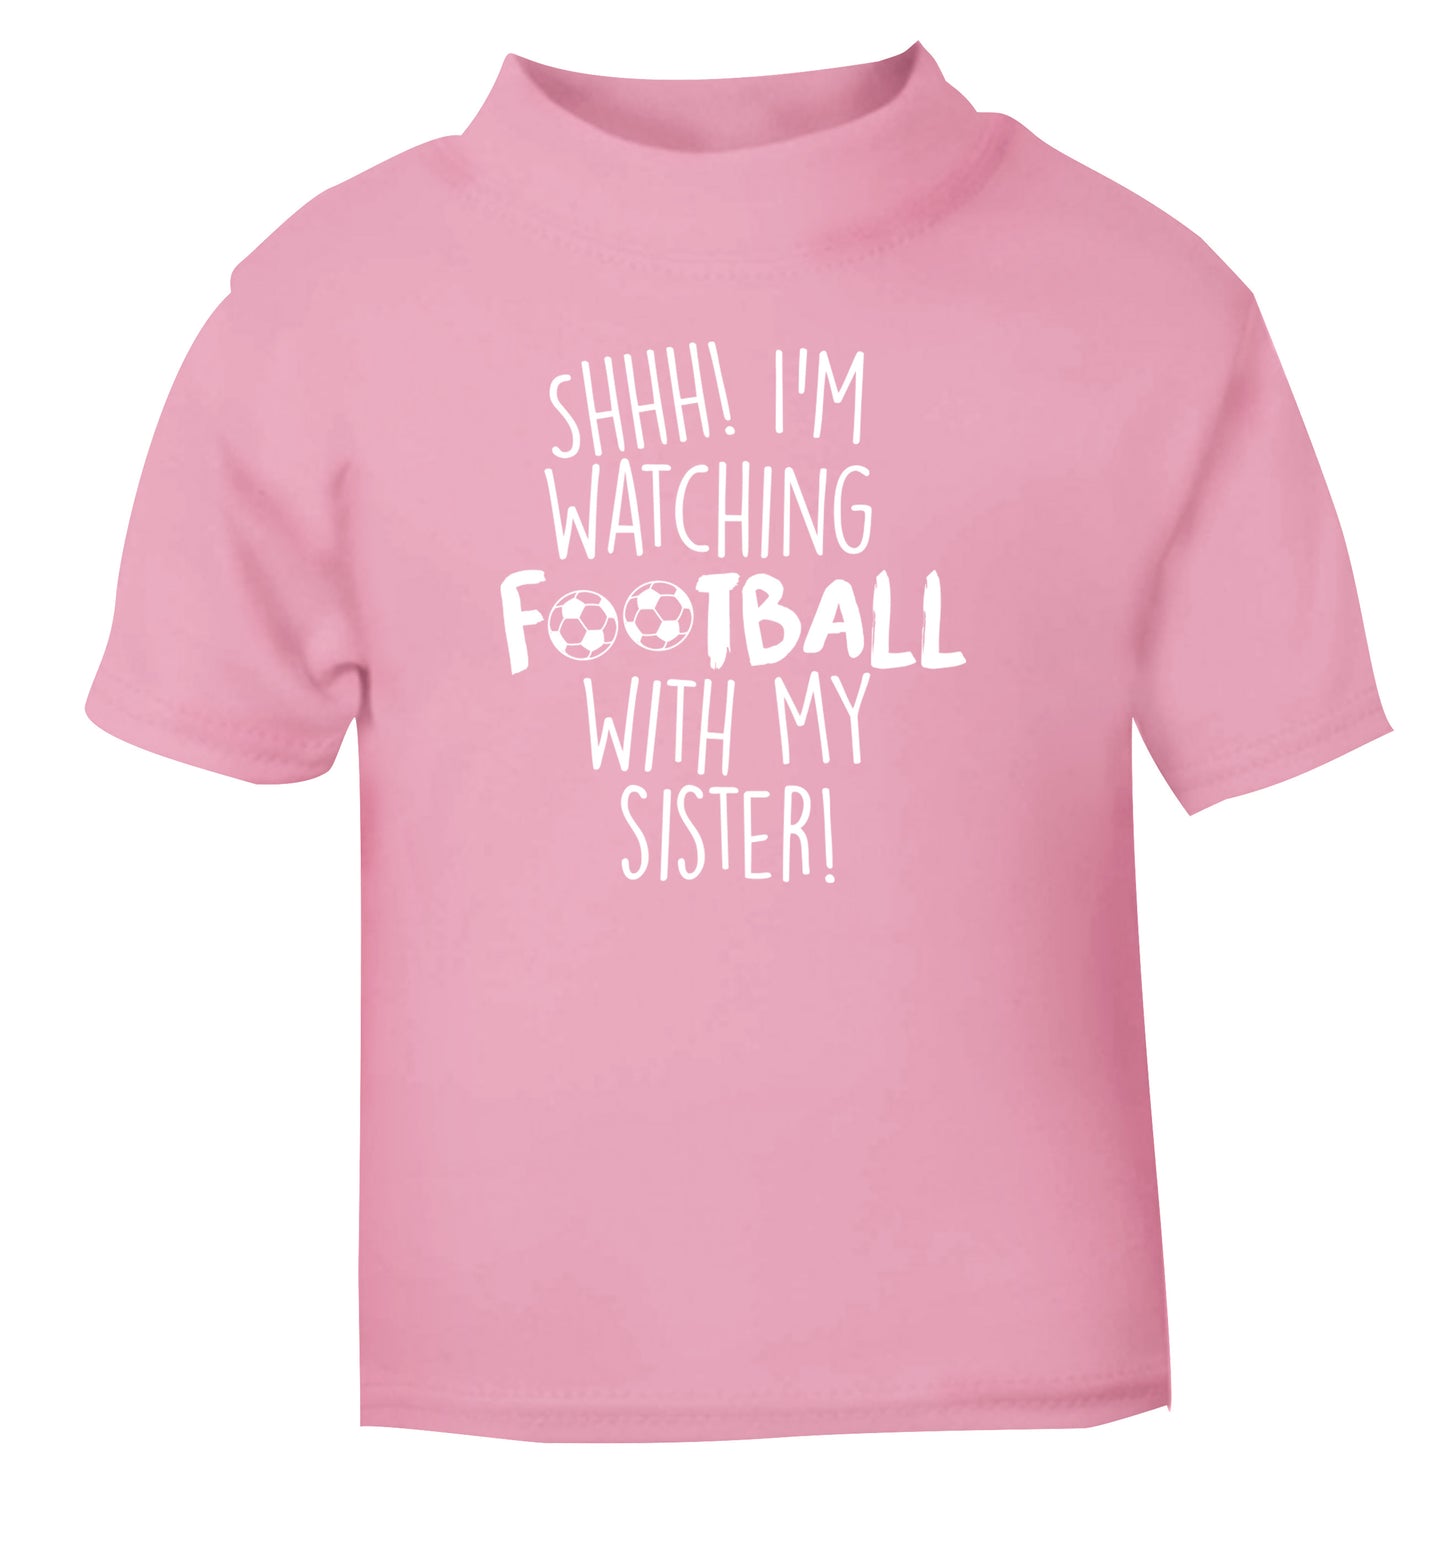 Shhh I'm watching football with my sister light pink Baby Toddler Tshirt 2 Years